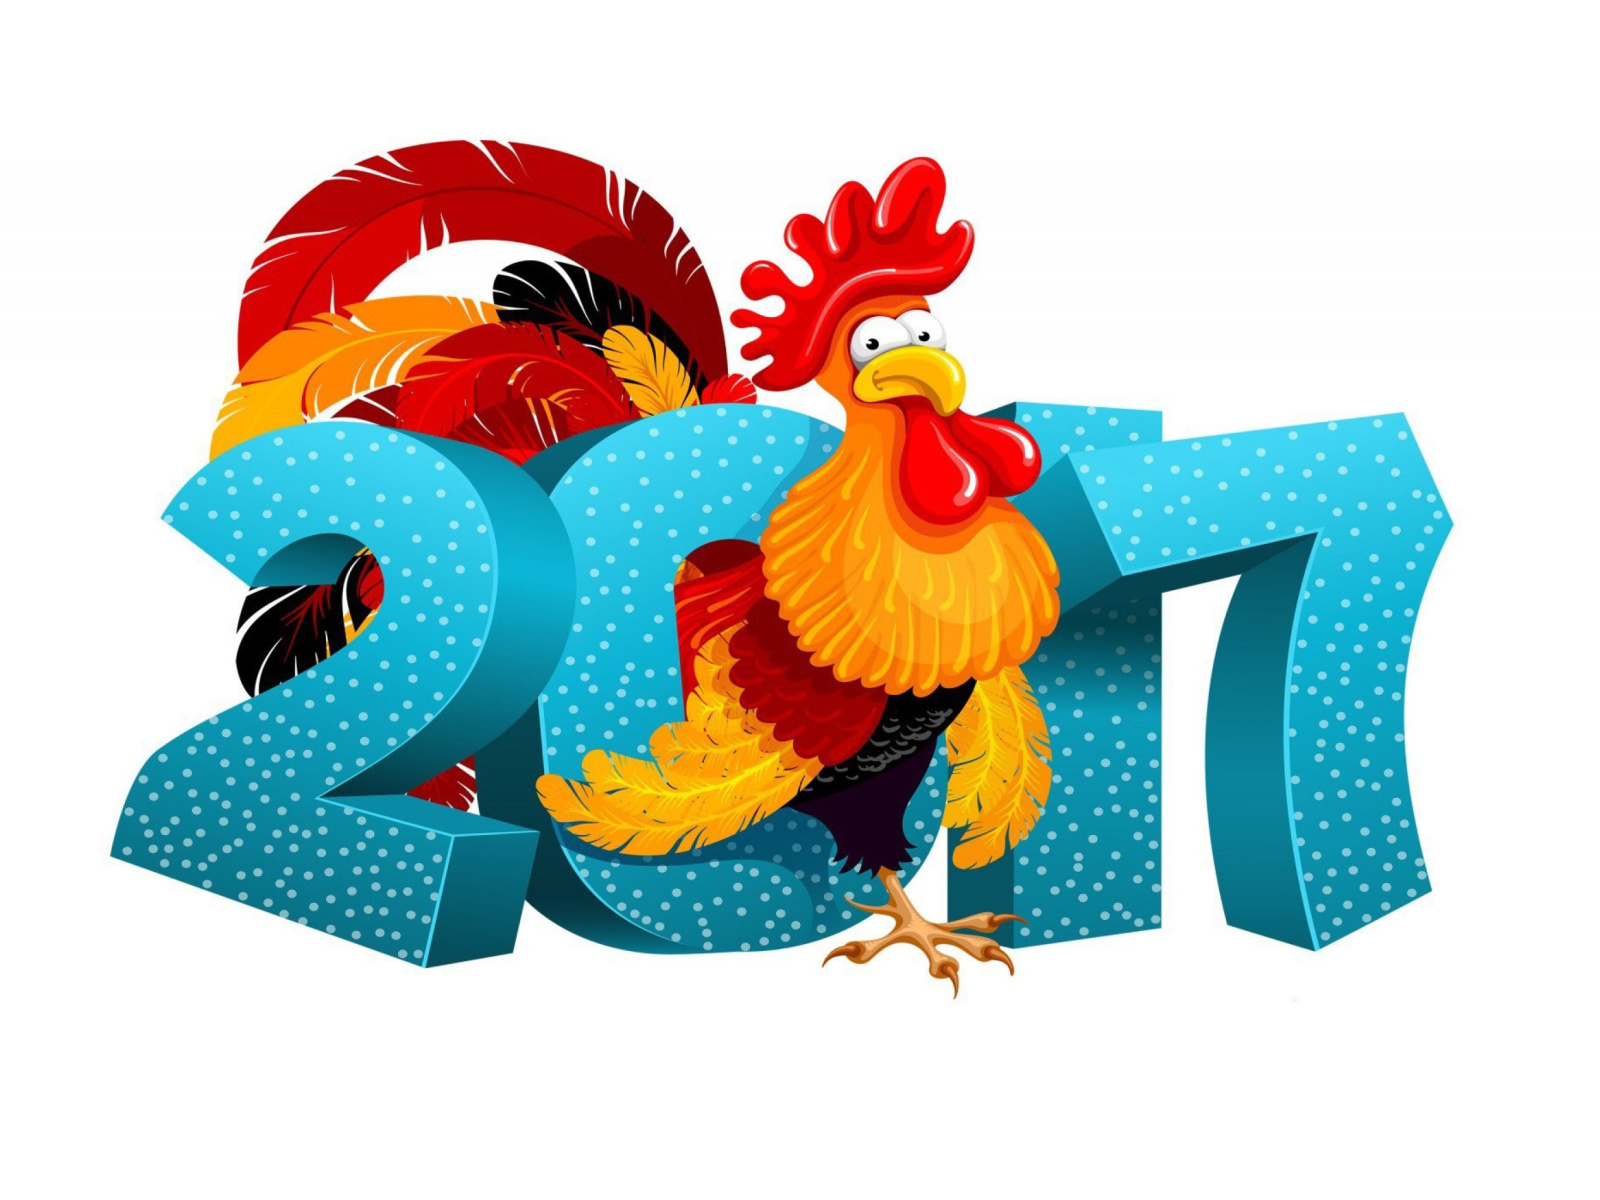 Das 2017 New Year Chinese Horoscope Red Cock Rooster Wallpaper 1600x1200